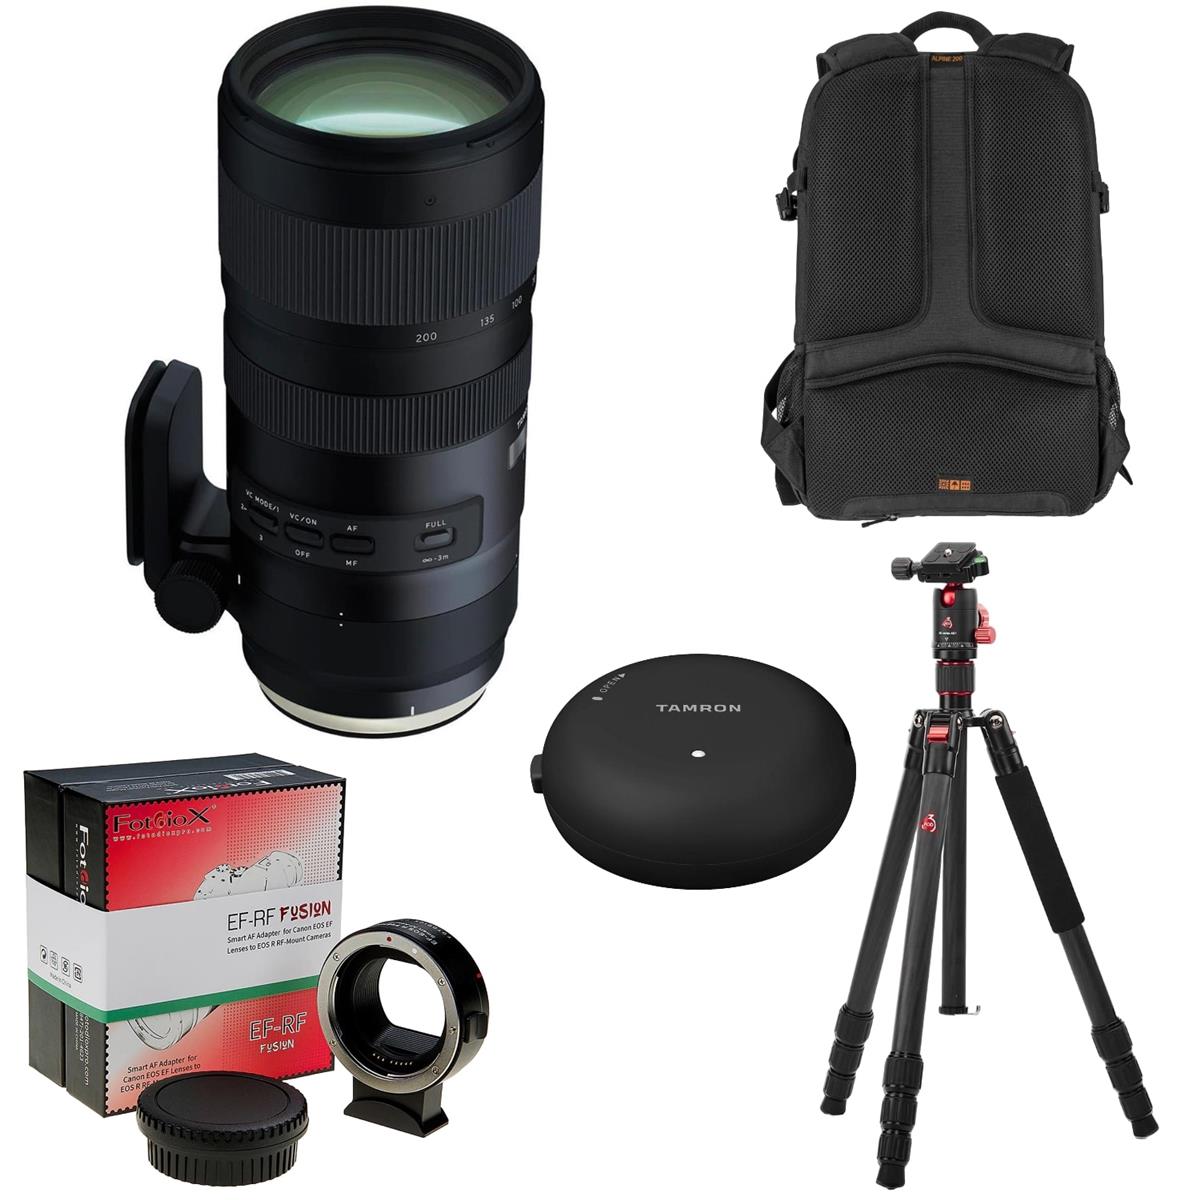 Tamron SP 70-200mm f/2.8 Di VC USD G2 Lens for Canon EF, with Accessories Kit -  AFA025C-700-AK